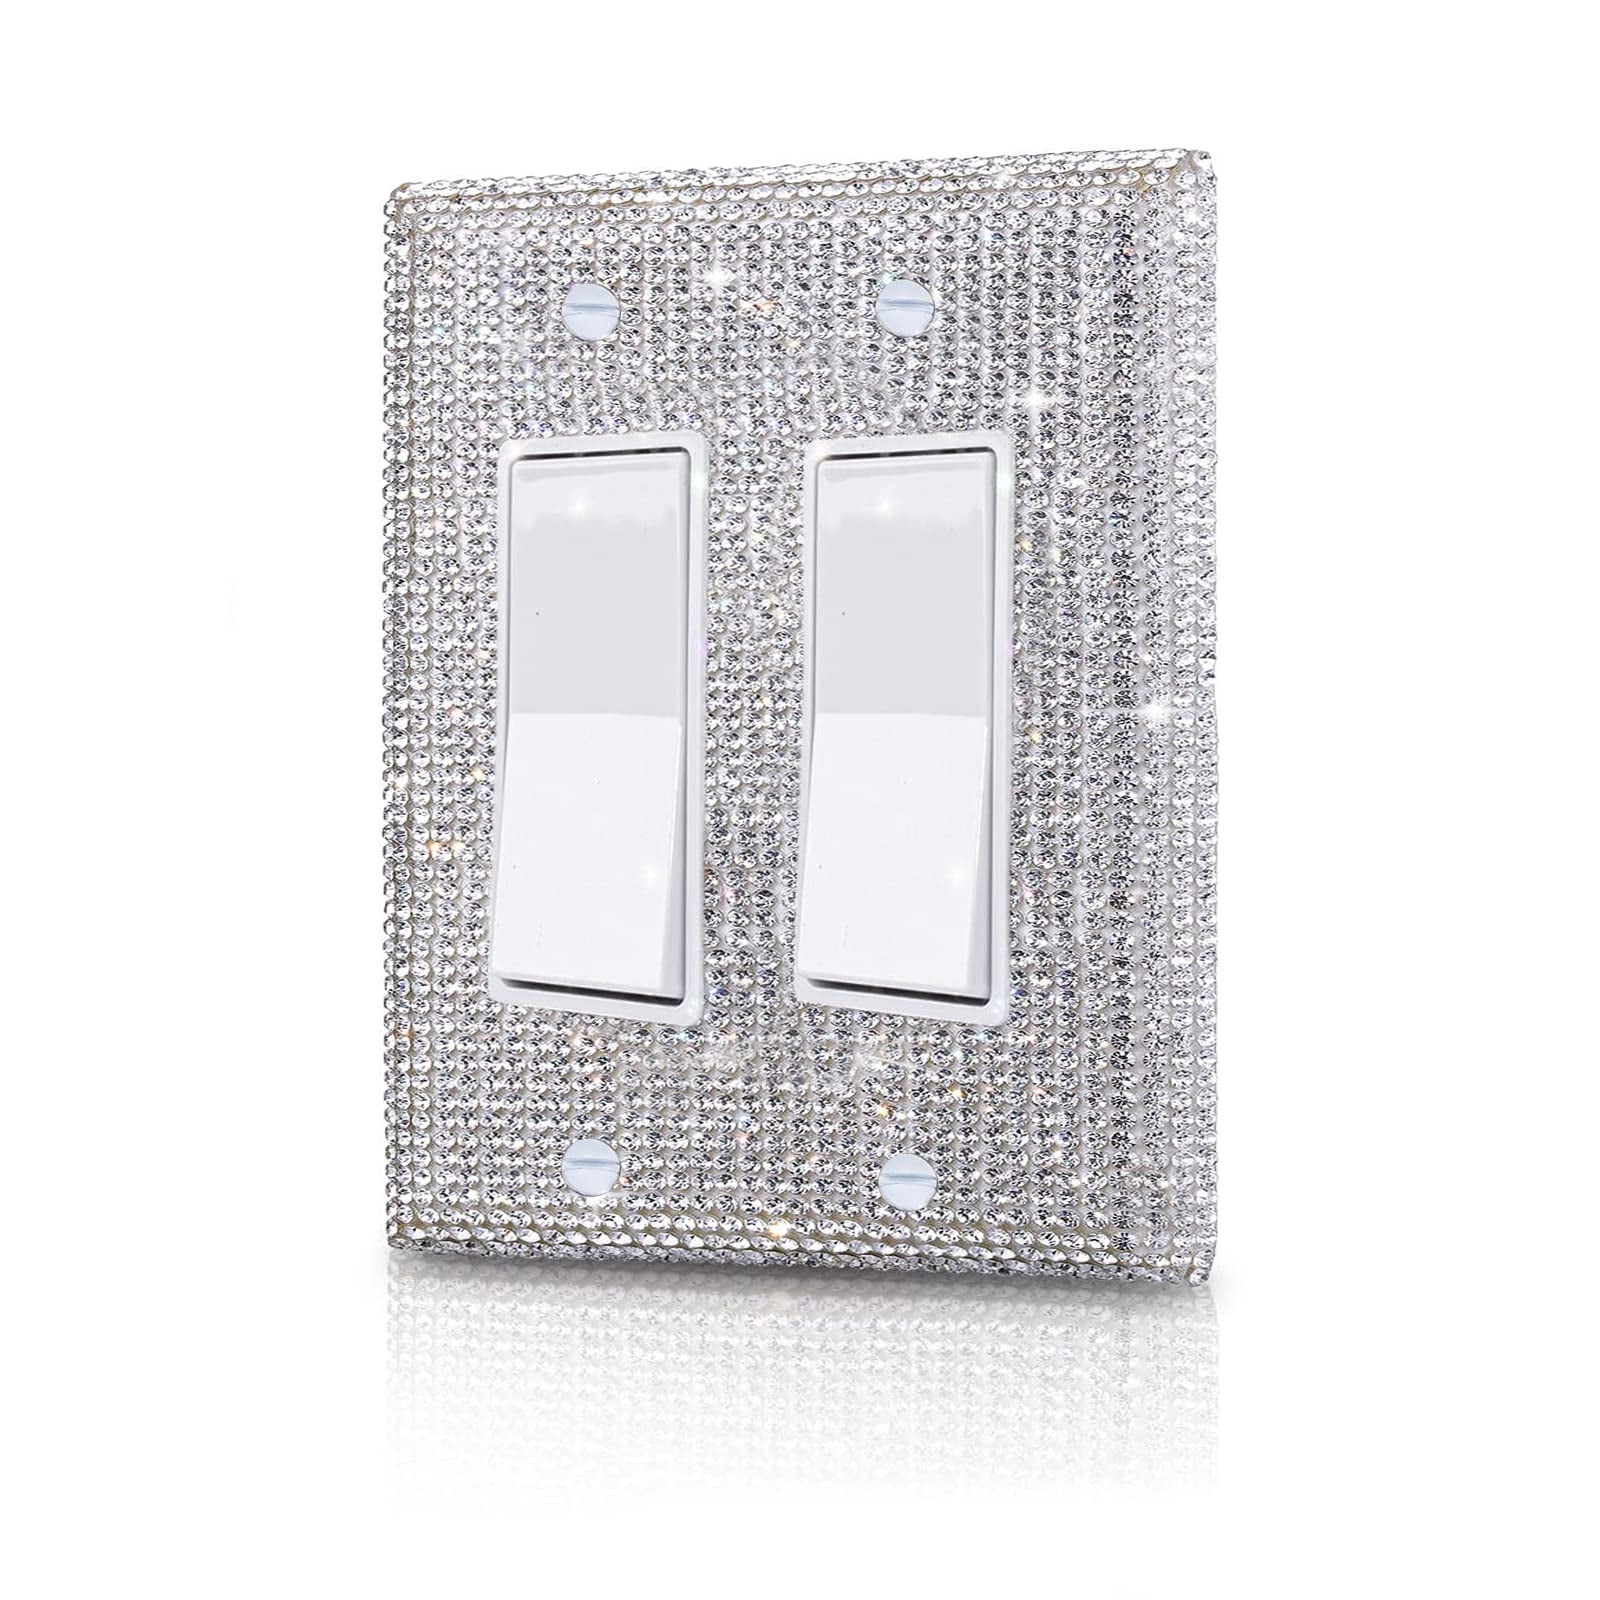 Metal Light Switch Plate Covers Marble Stone Design Home Decor White And Grey 08 